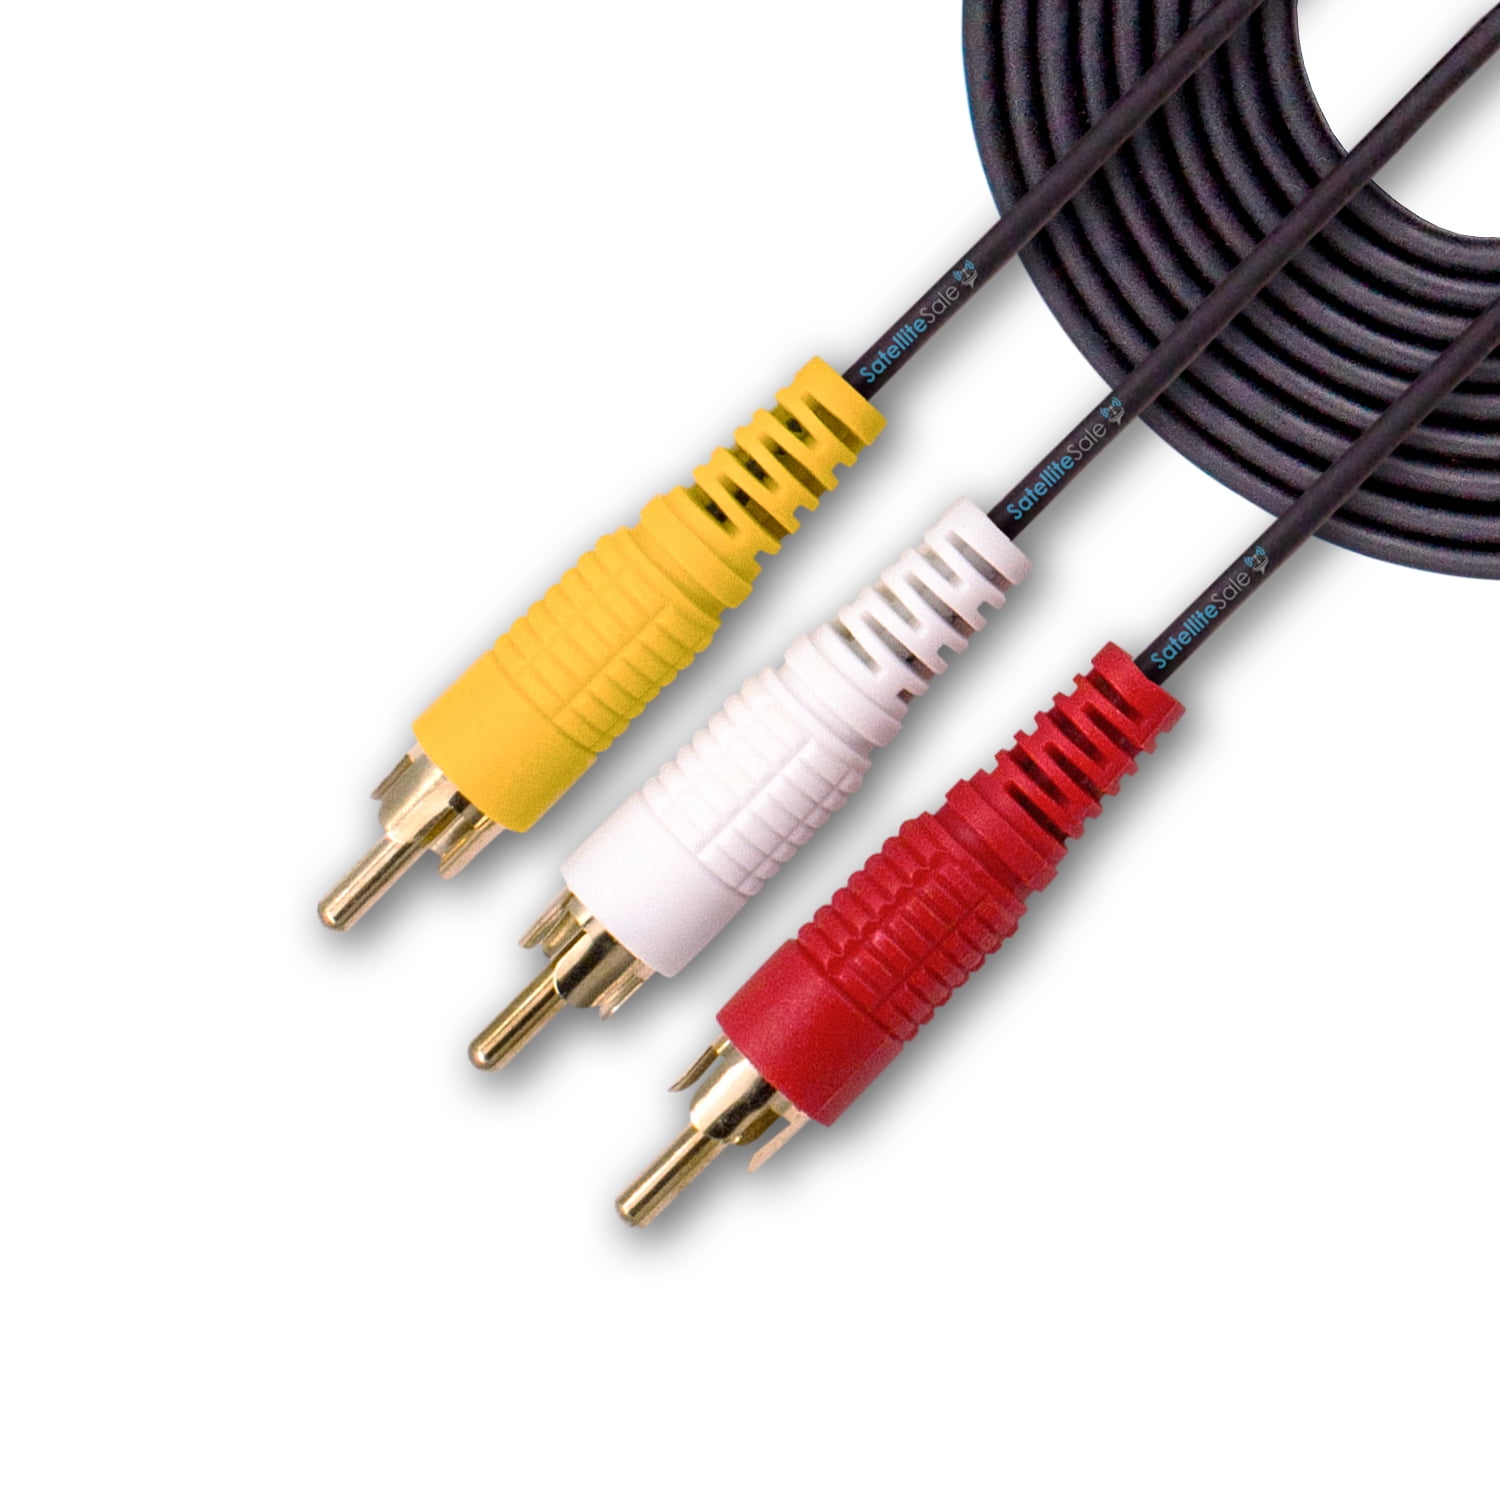 NEW 9 FT PREMIUM 3 RCA GOLD PLATRED COMPOSITE EXTENSION CABLE A/V AUDIO VIDEO AV 